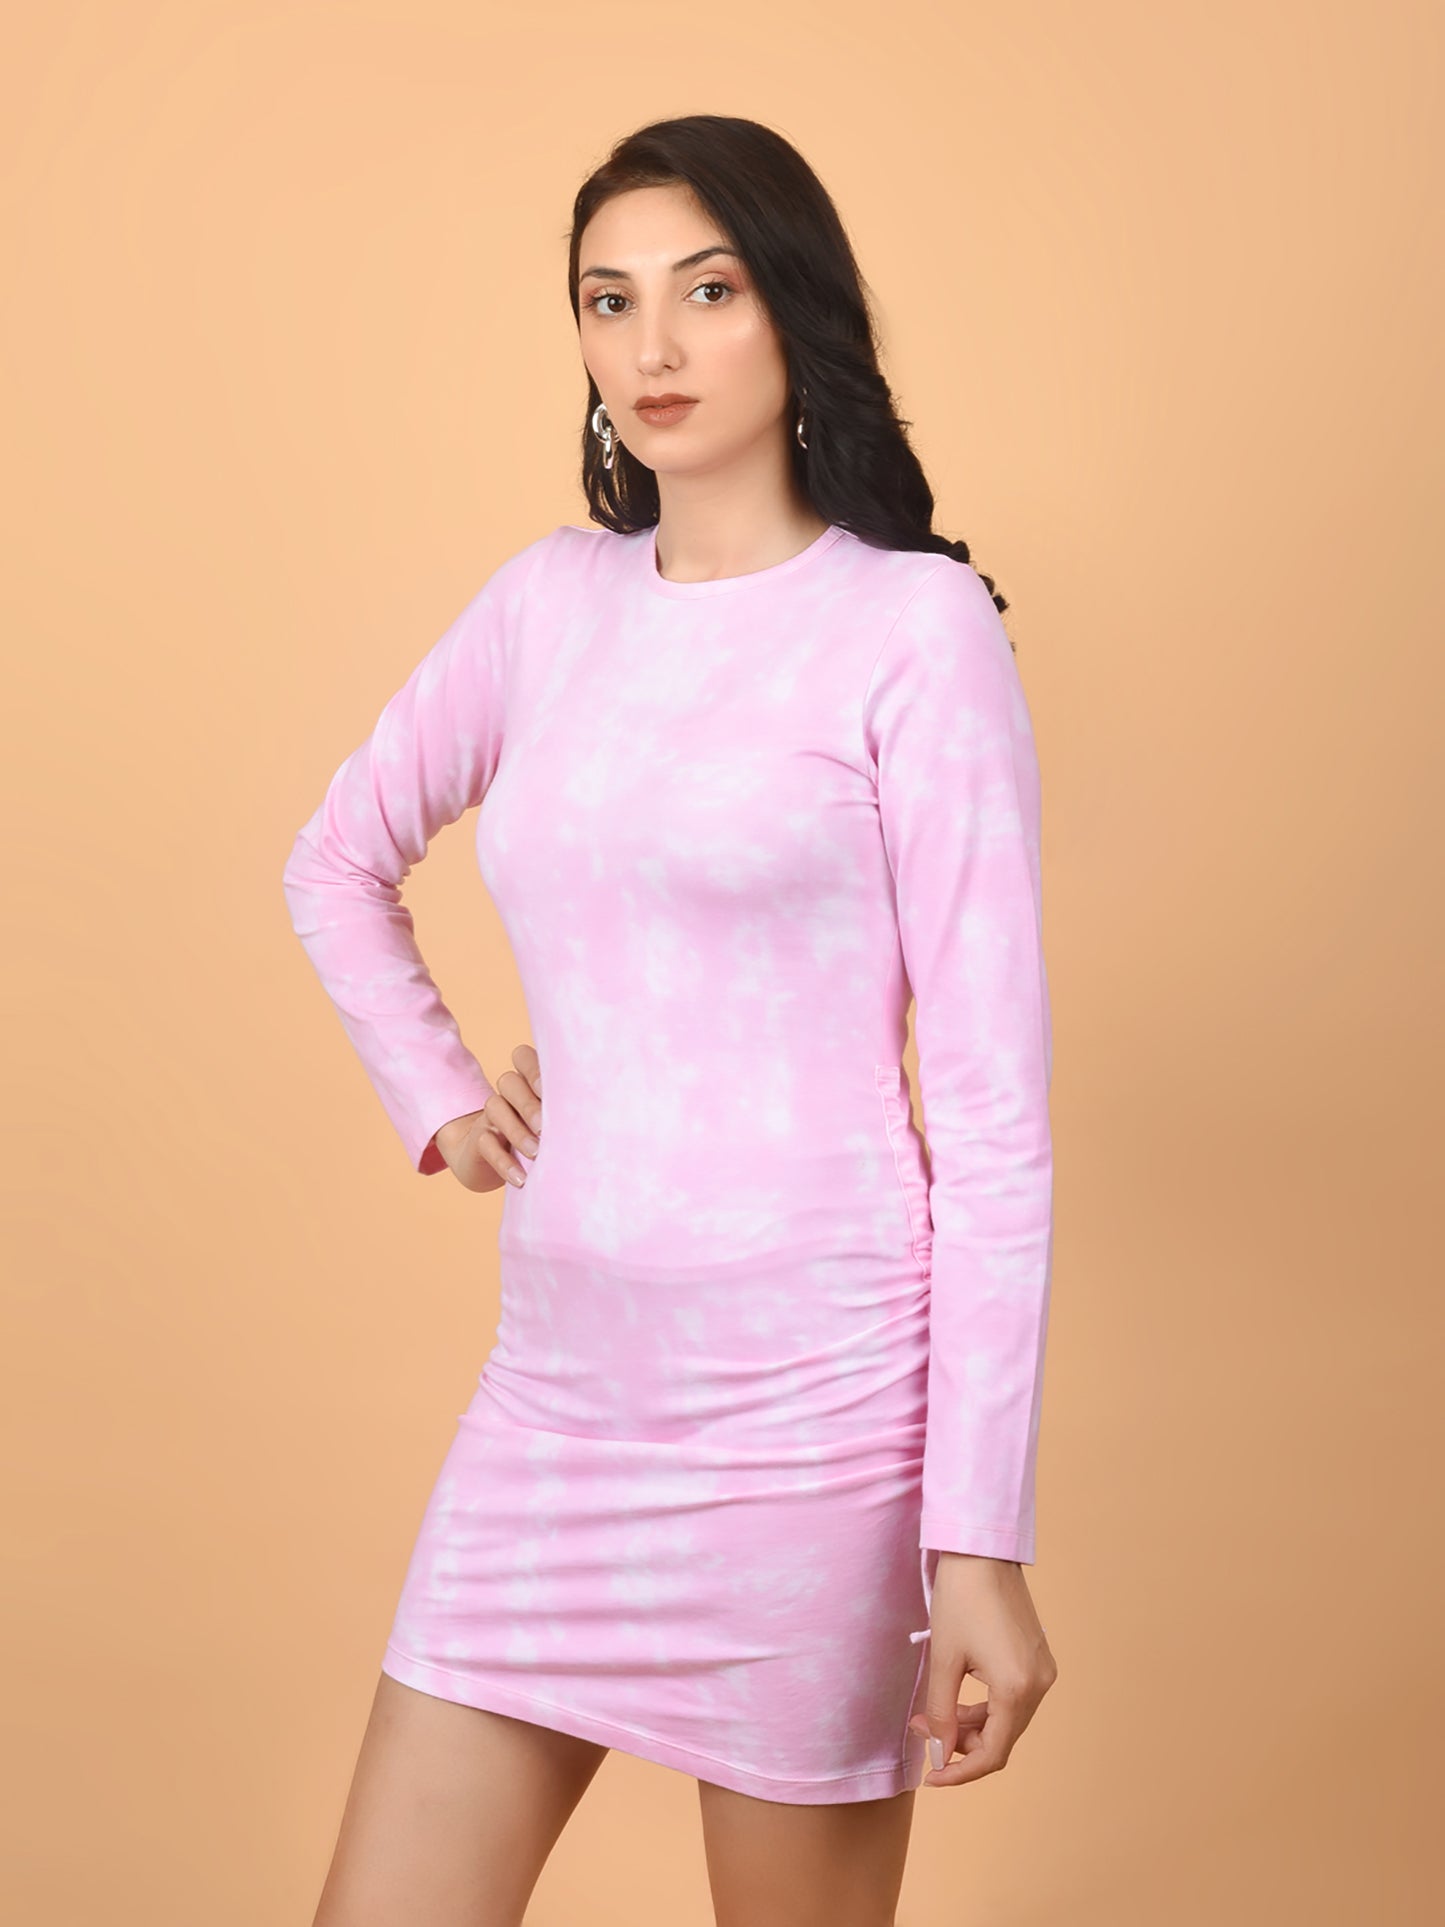 Flawless Women Pink Bodycon Mini Dress | PINK AUTUMN Being Flawless